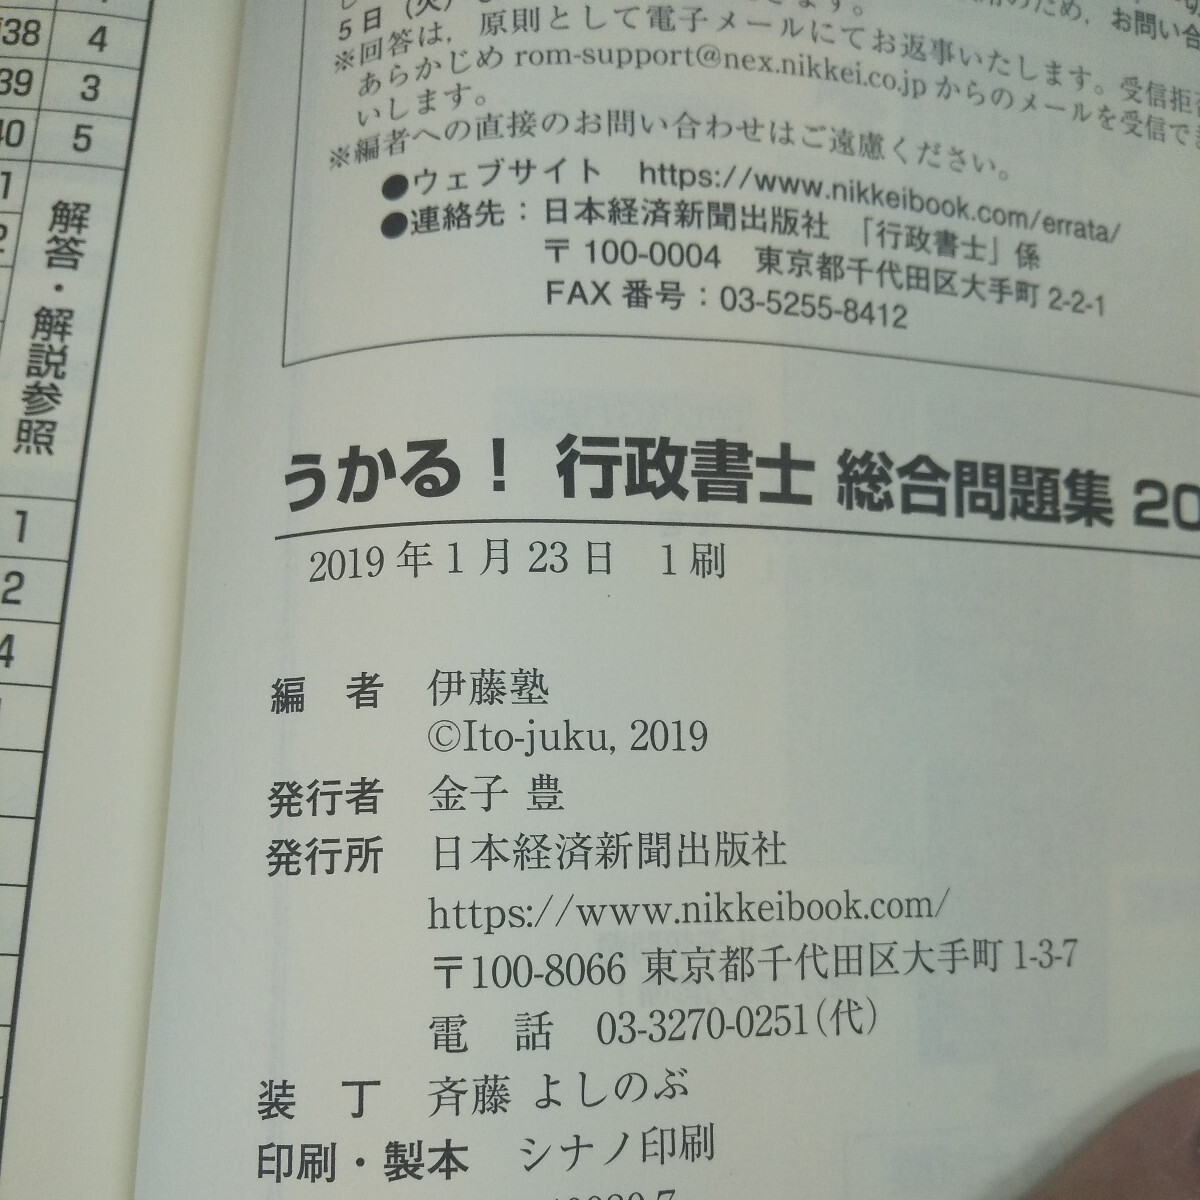 n-212...! notary public 2019 fiscal year edition synthesis workbook . wistaria . compilation Japan economics newspaper publish company Heisei era 30 fiscal year examination problem answer * explanation no. 1. issue *10